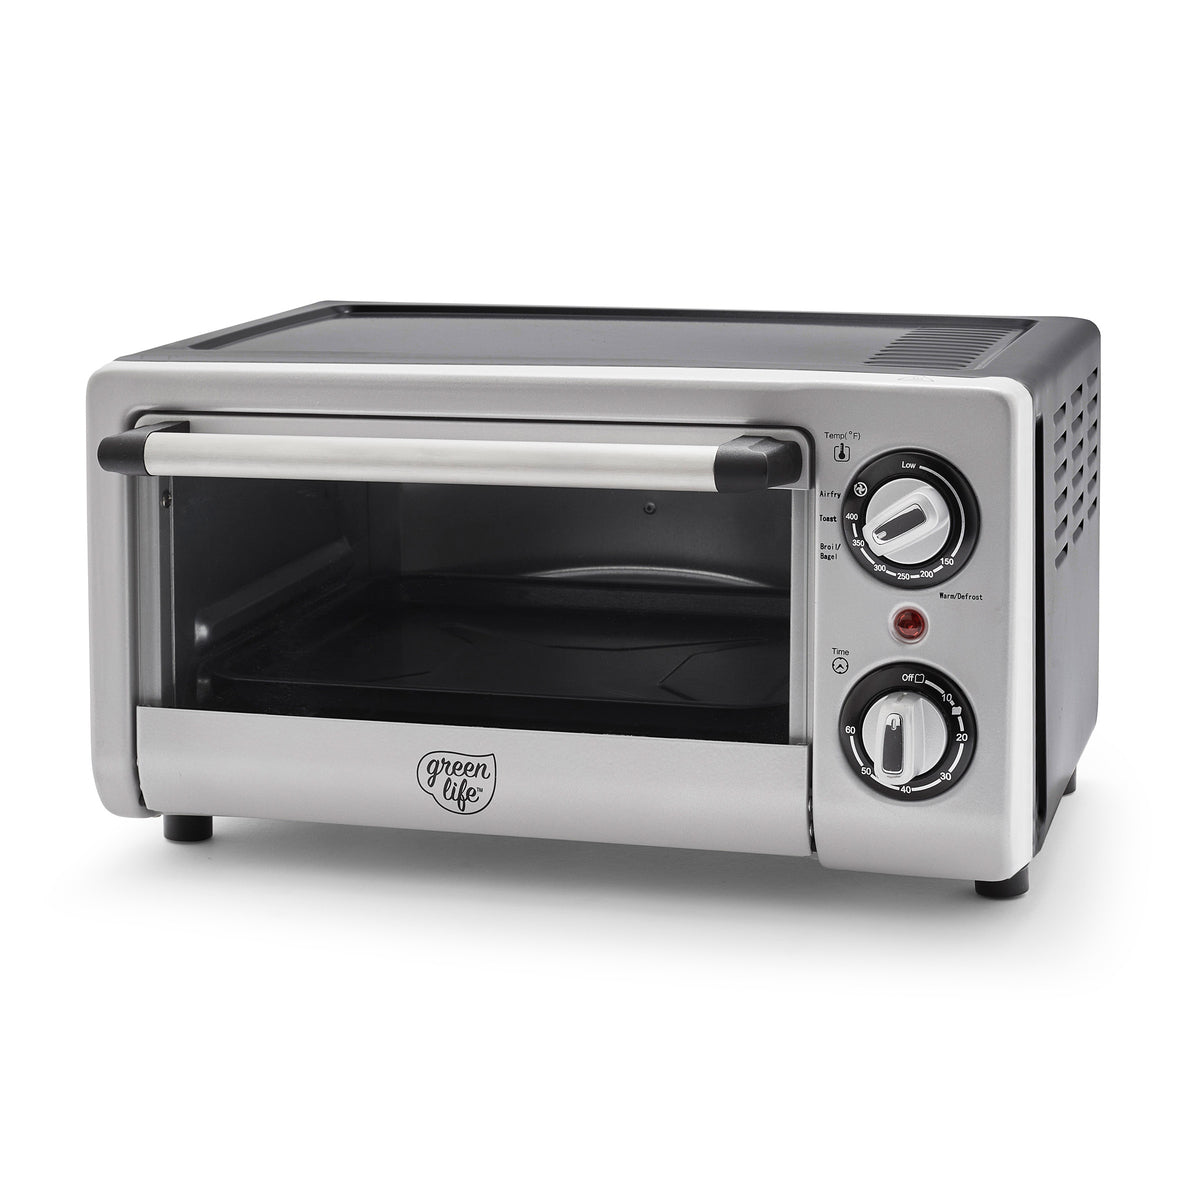 GreenLife Air Fry Toaster Oven, Black